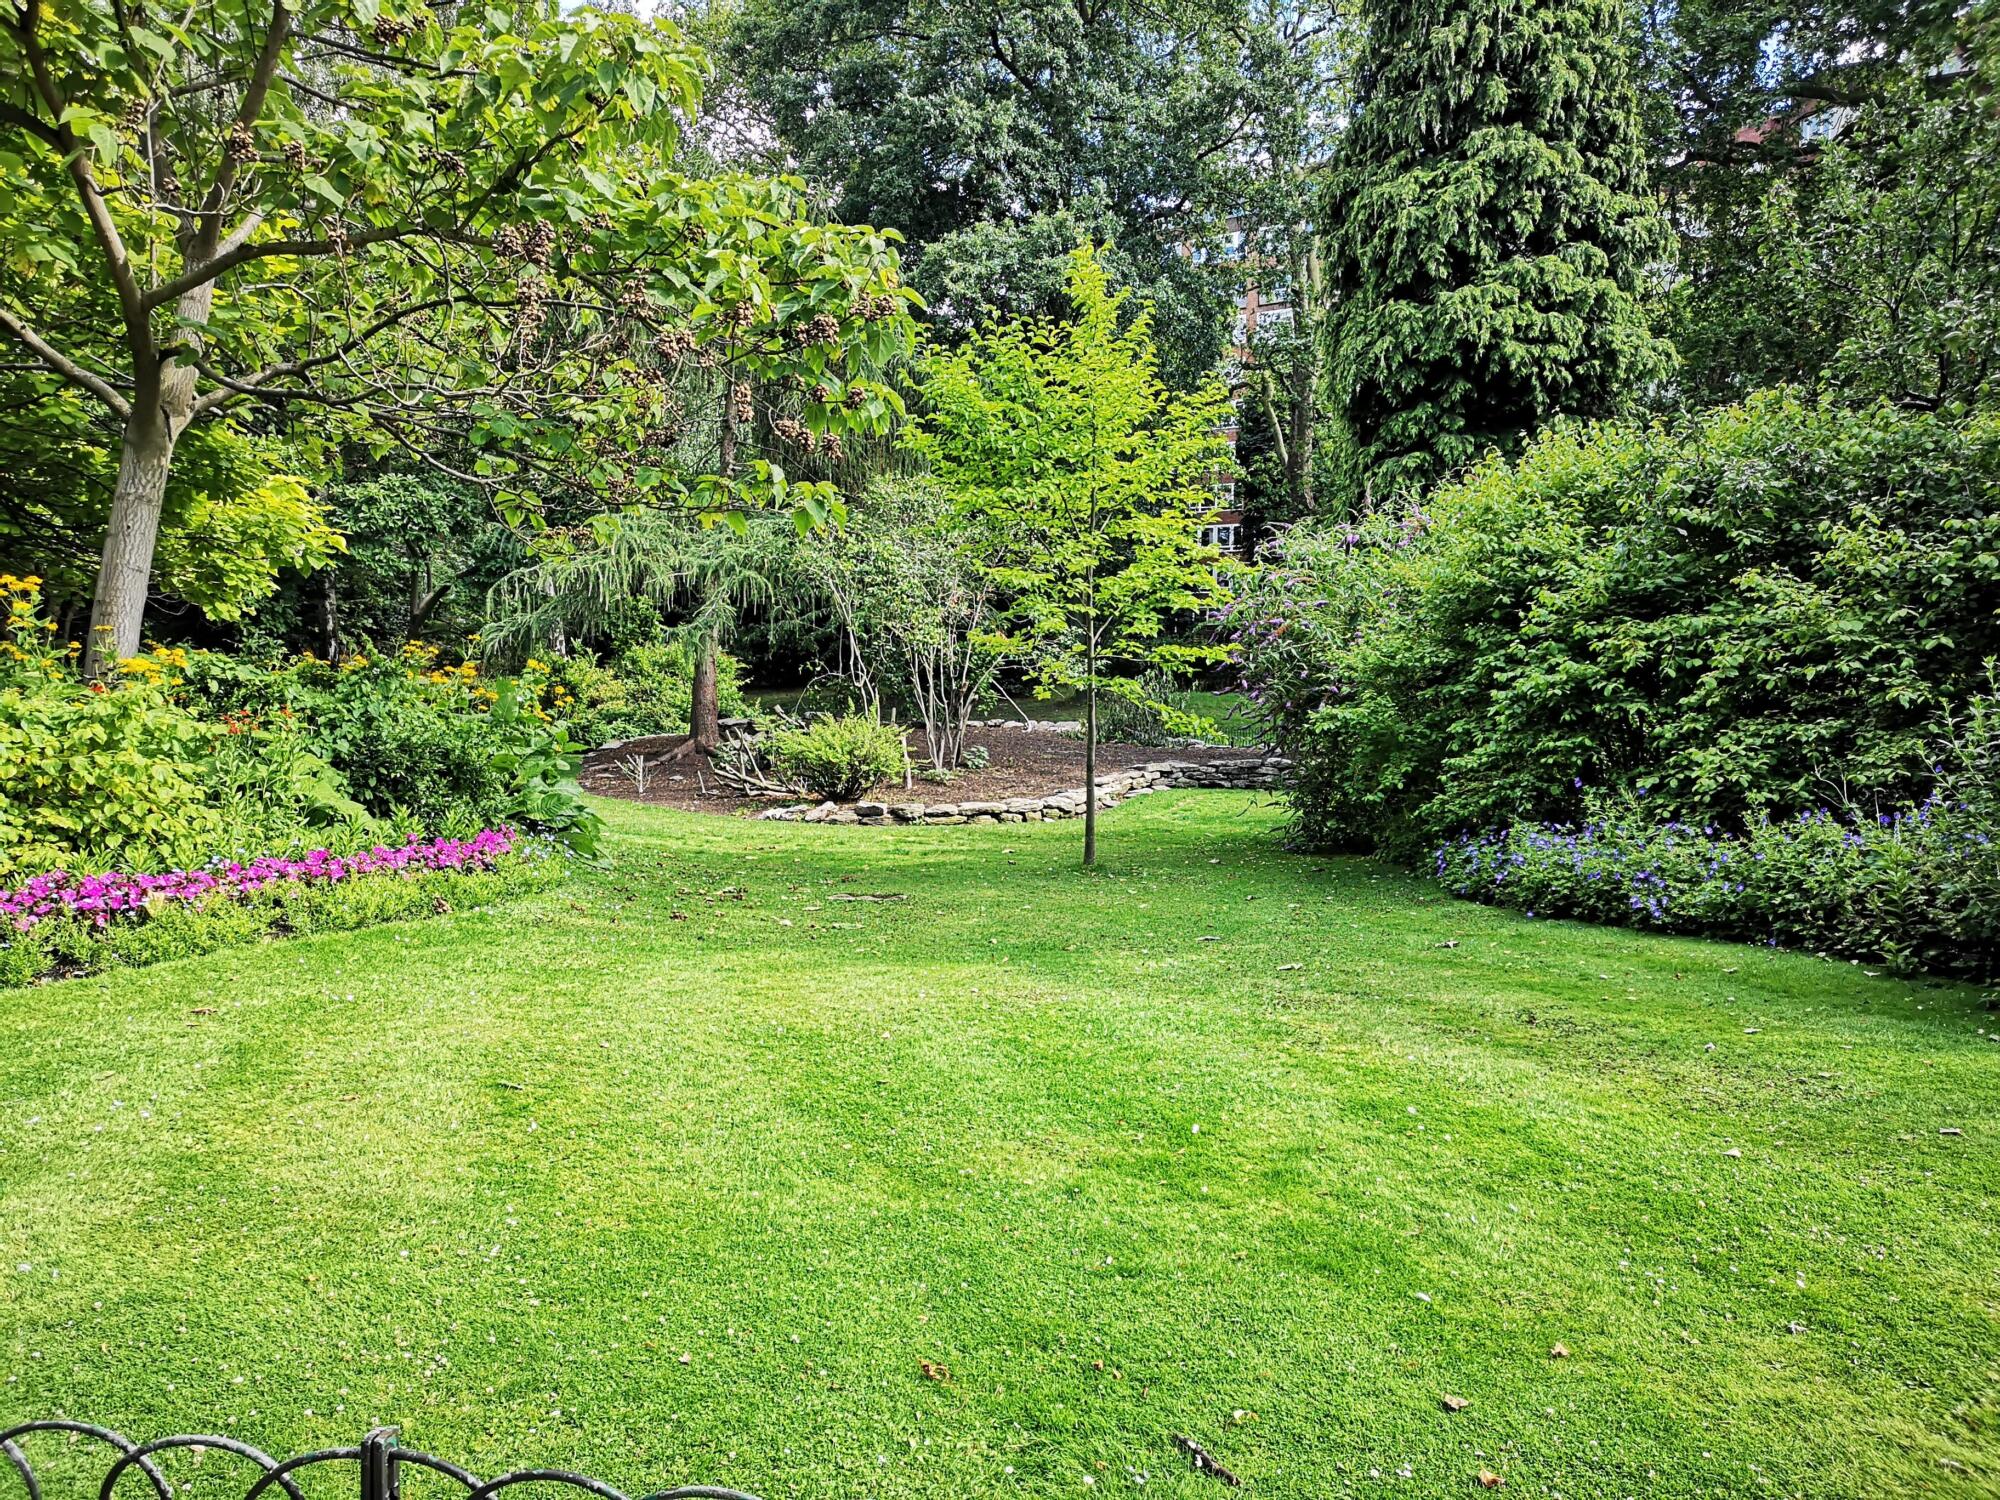 A green grassy area with improved landscaping.